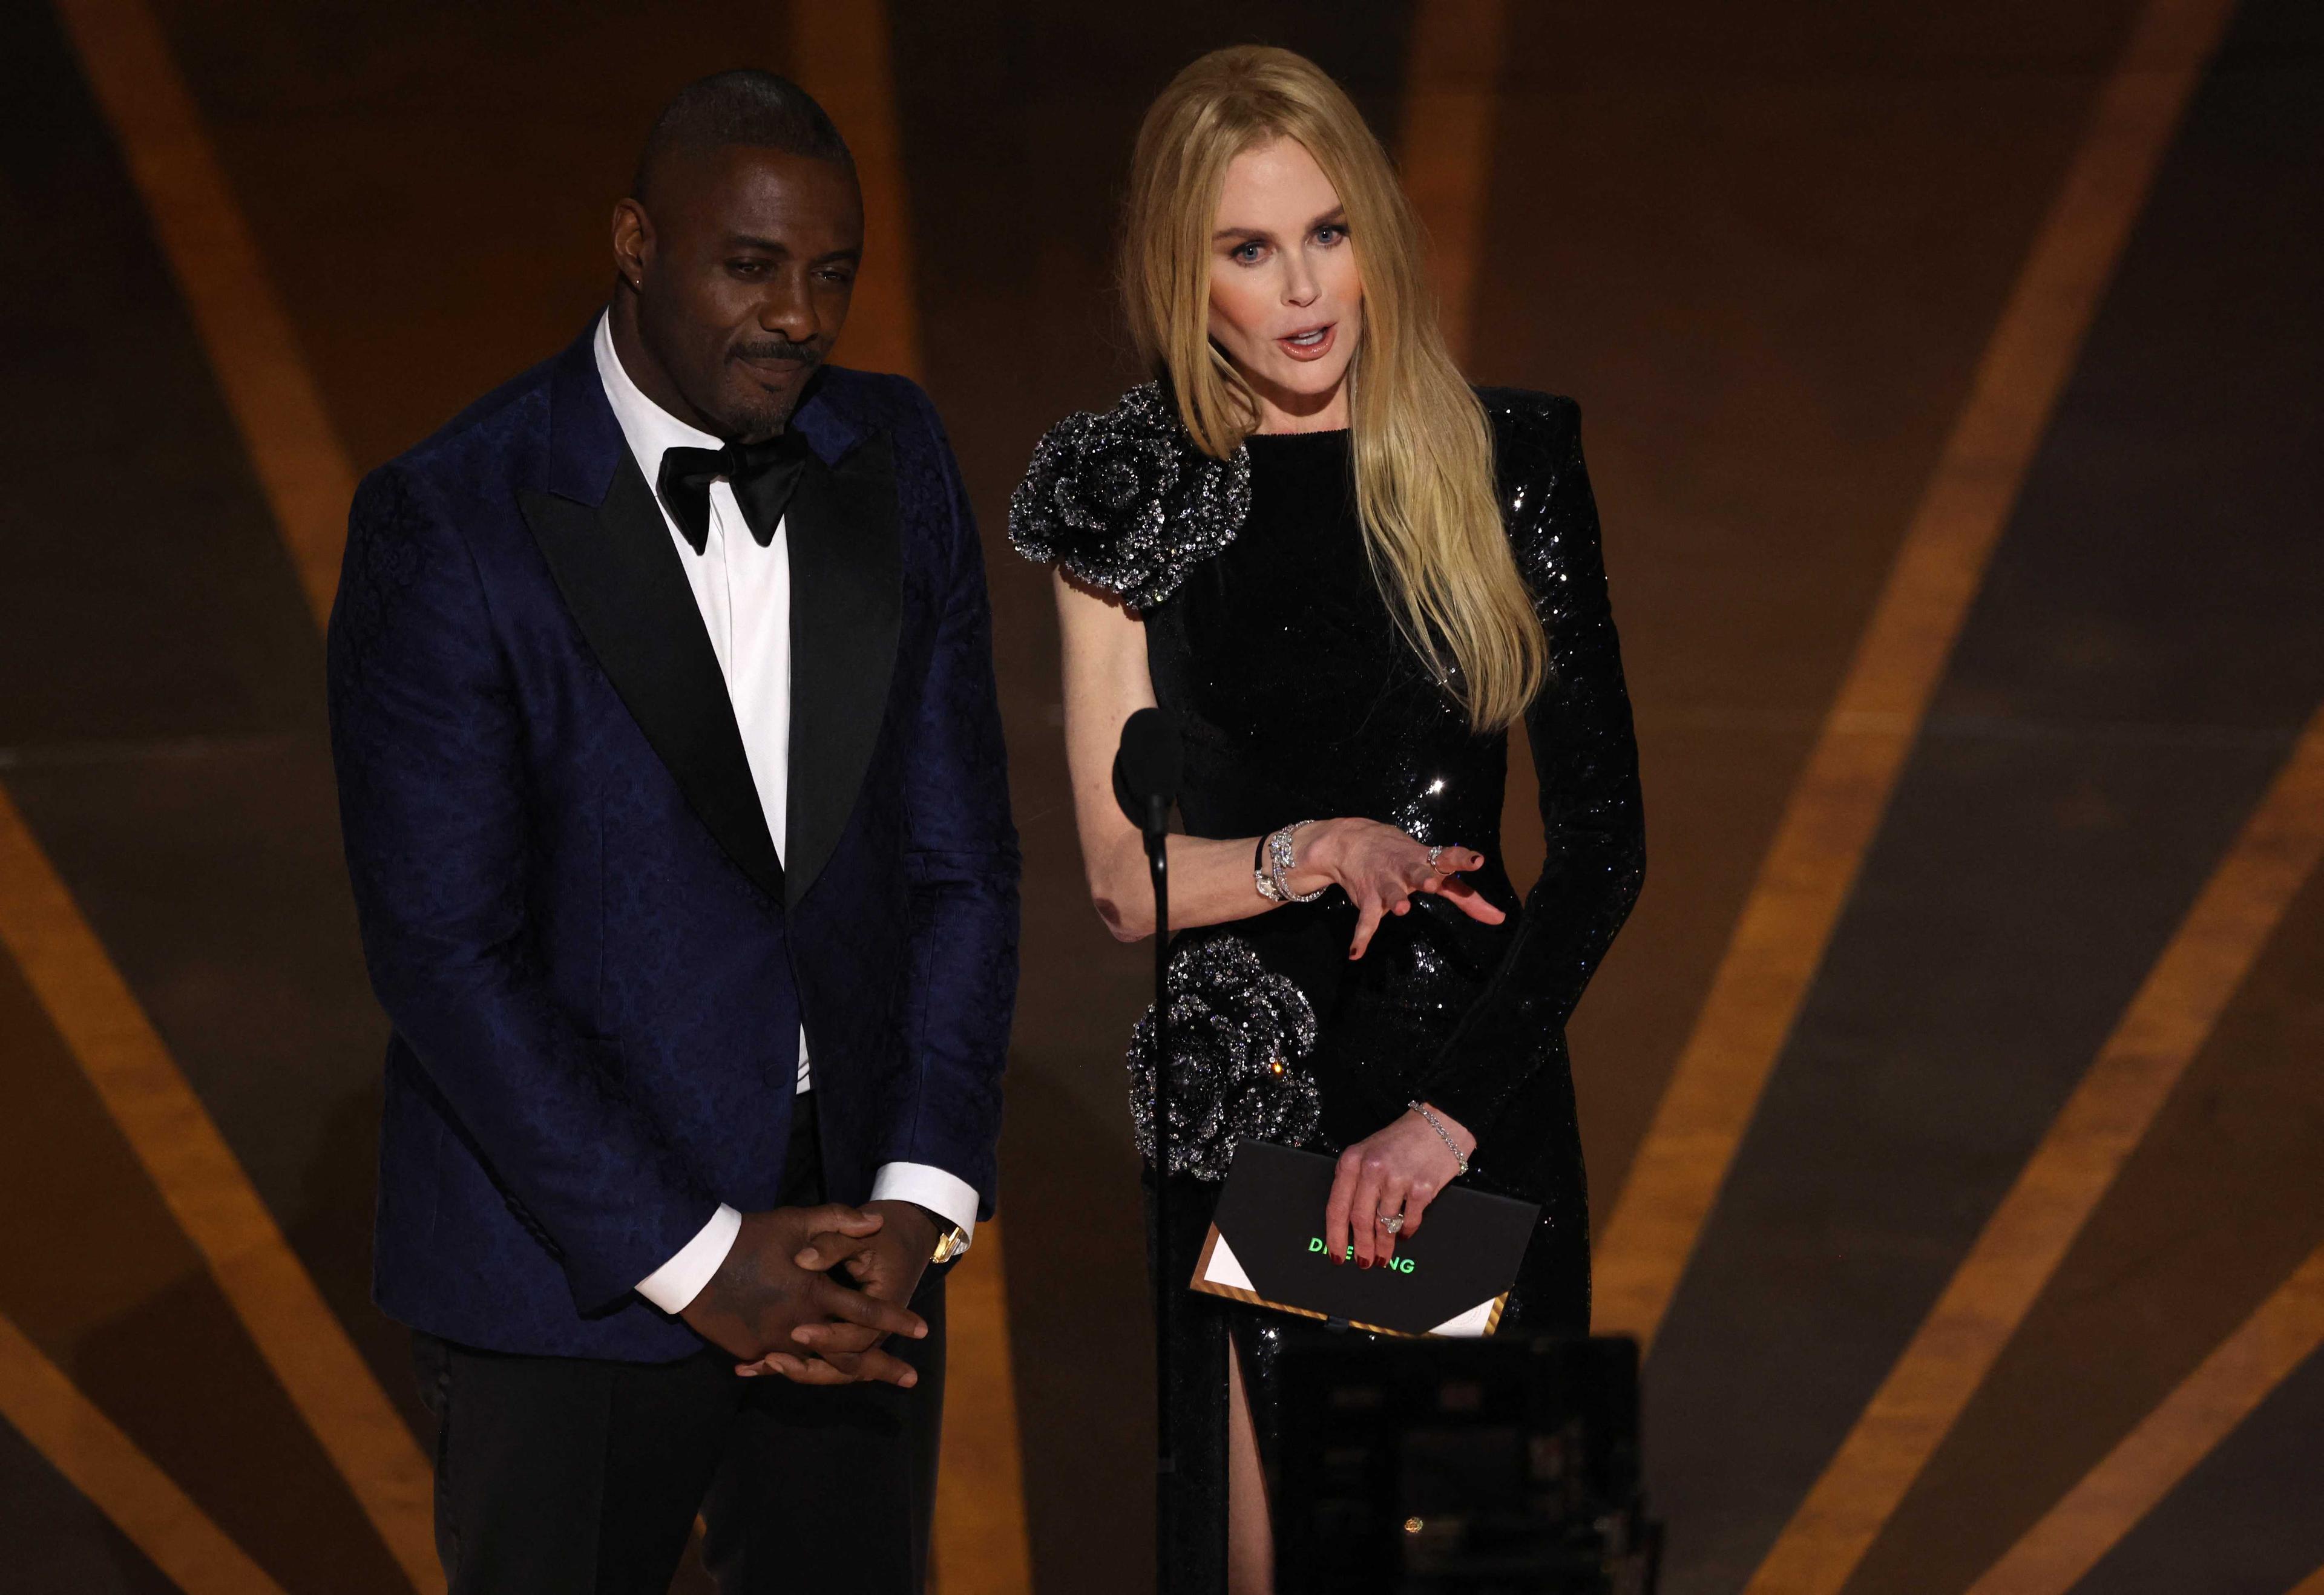 Idris Elba and Nicole Kidman take the stage to present an award during the Oscars show at the 95th Academy Awards in Hollywood, Los Angeles, California, US, March 12. Photo: Reuters